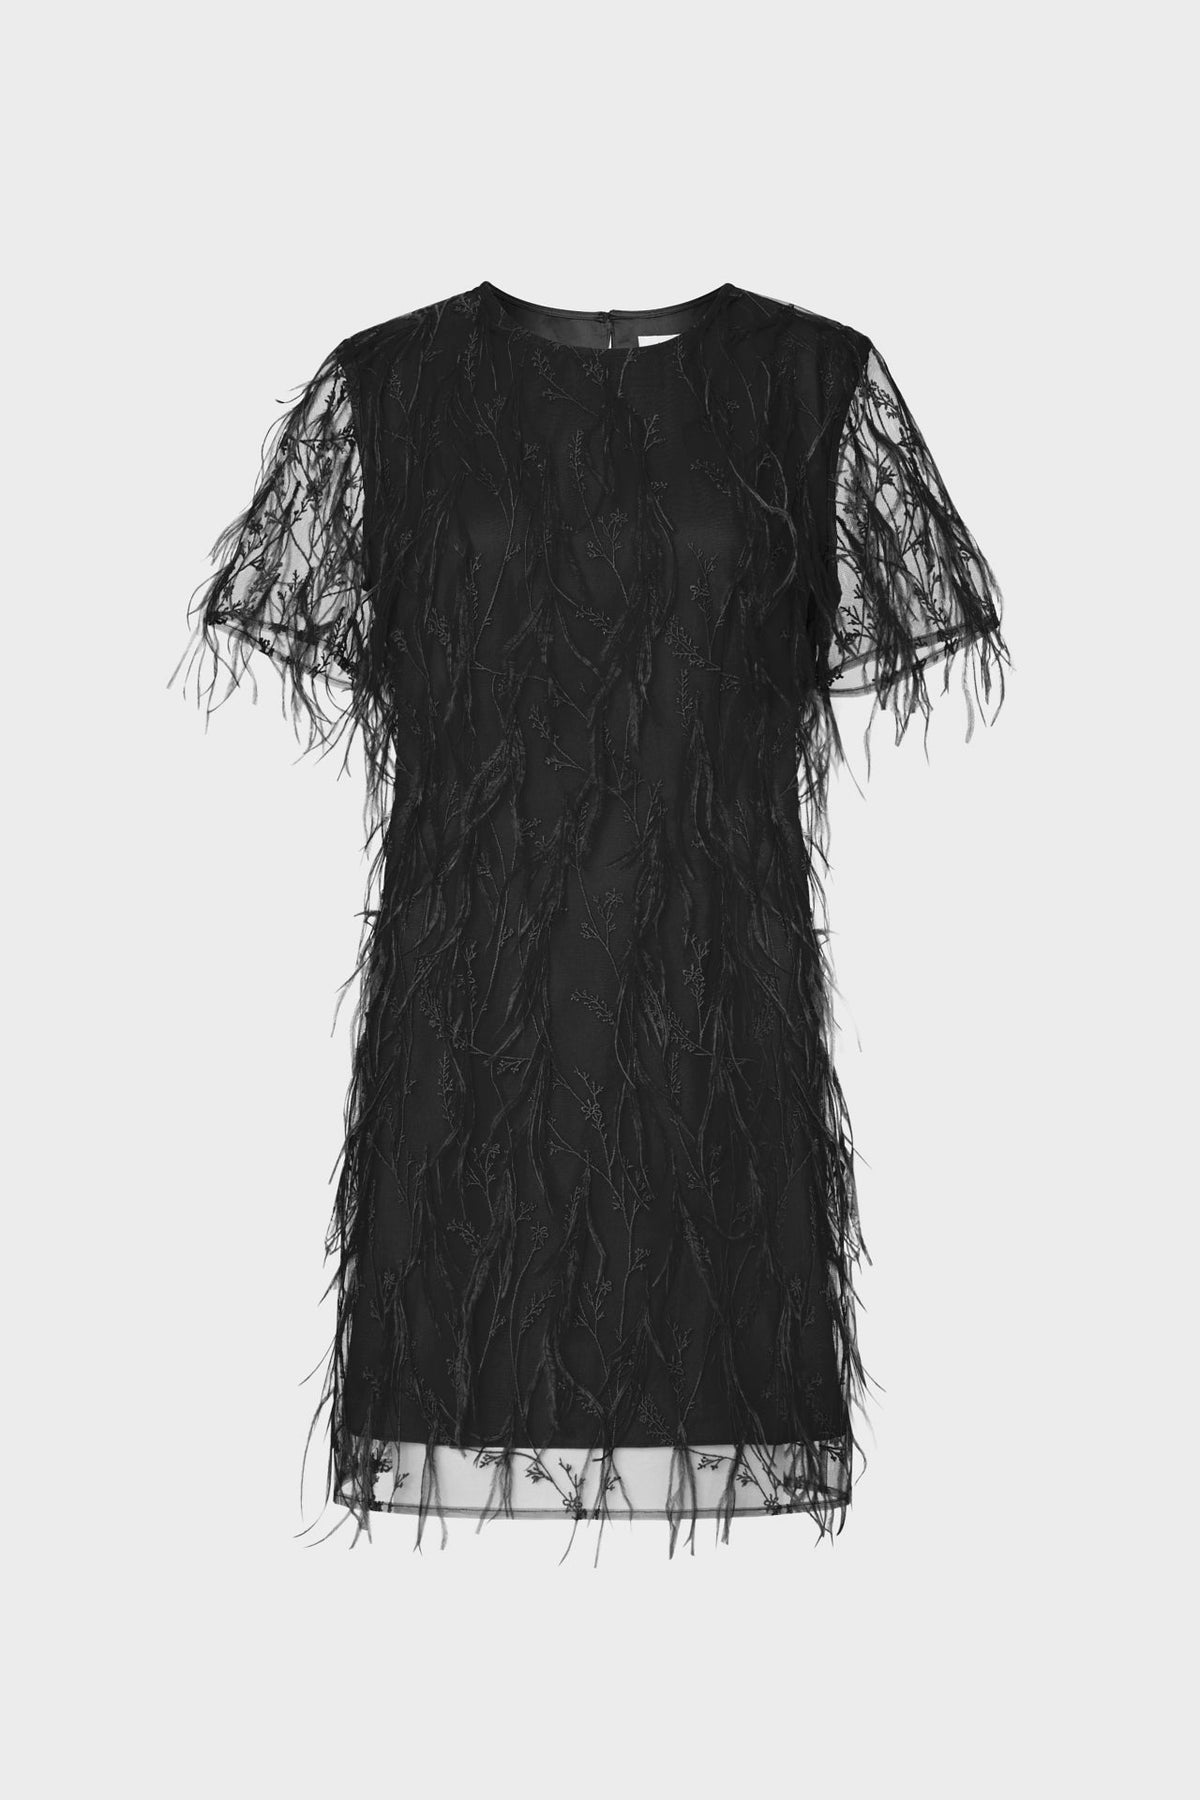 Black Faux Feathers Maternity Rbe Long Batwing Sleeves Two Pieces Floral  Embroidered Sequins Strapless Boho Photos Evening Gowns, Beyondshoping